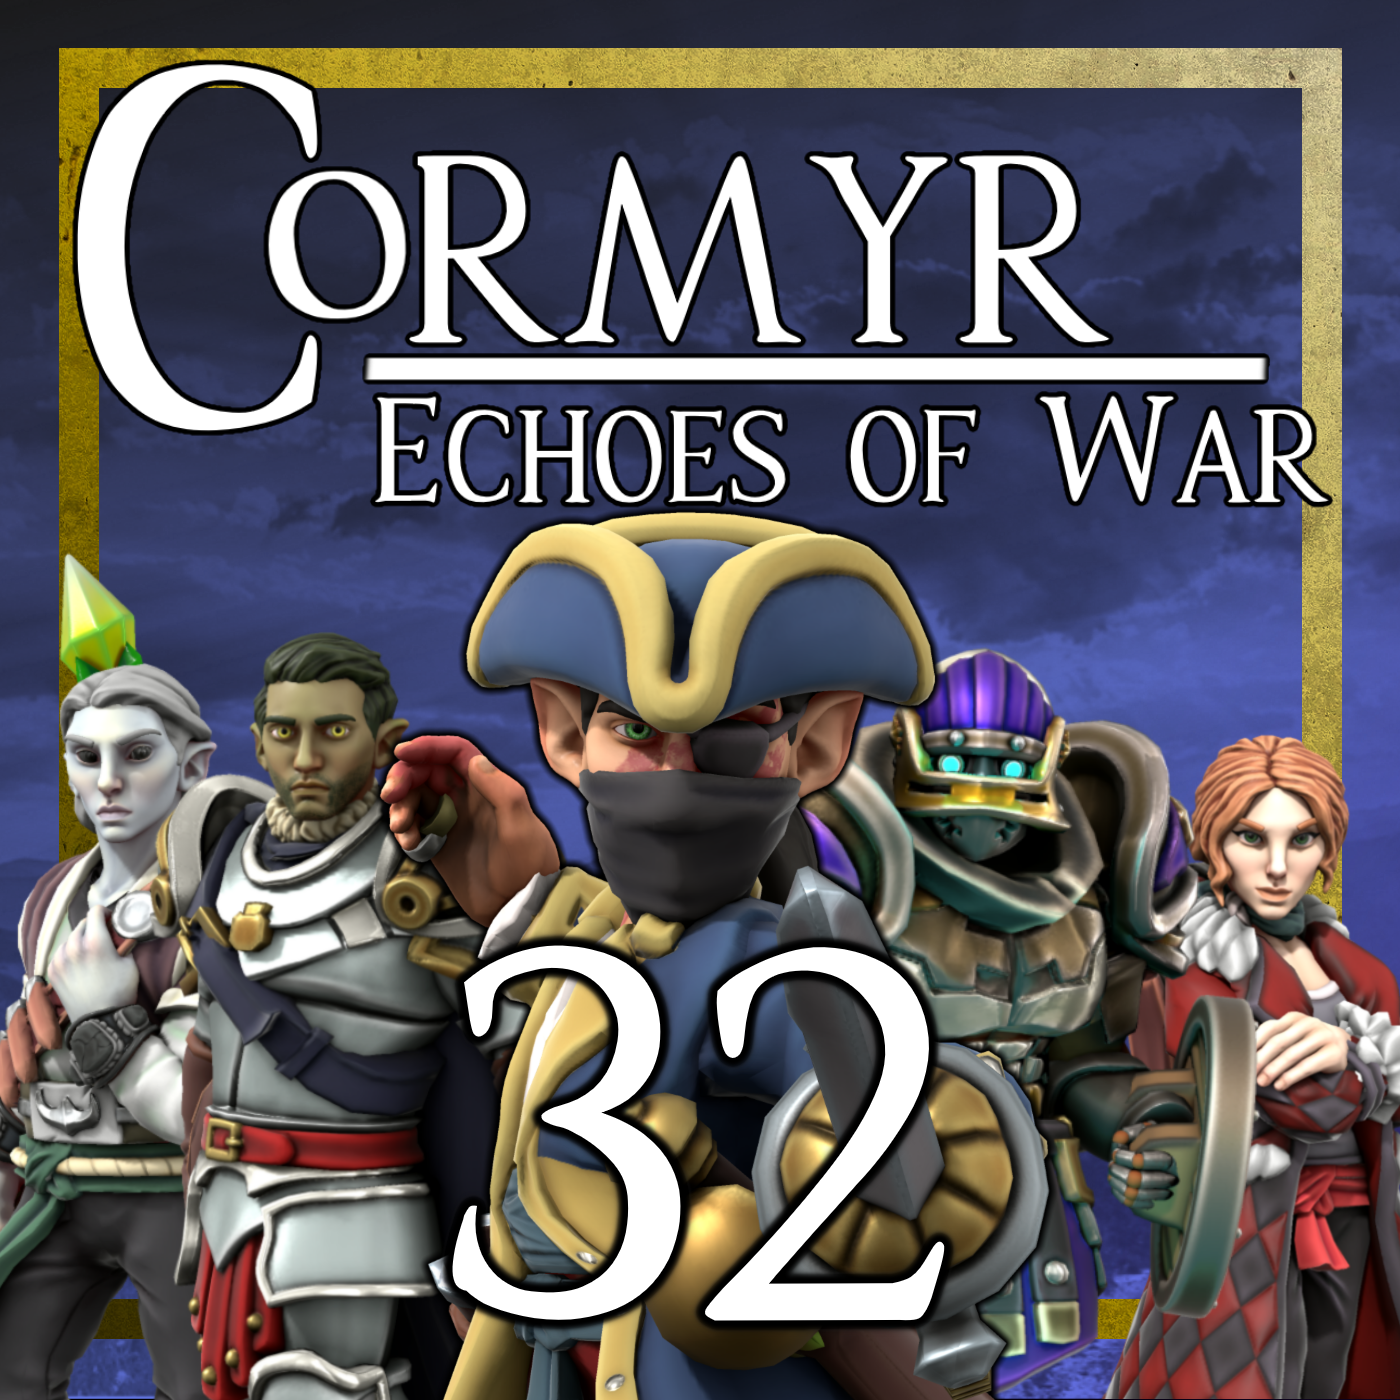 Cormyr: Echoes of War - Ep. 32 - The Penitent Martyr